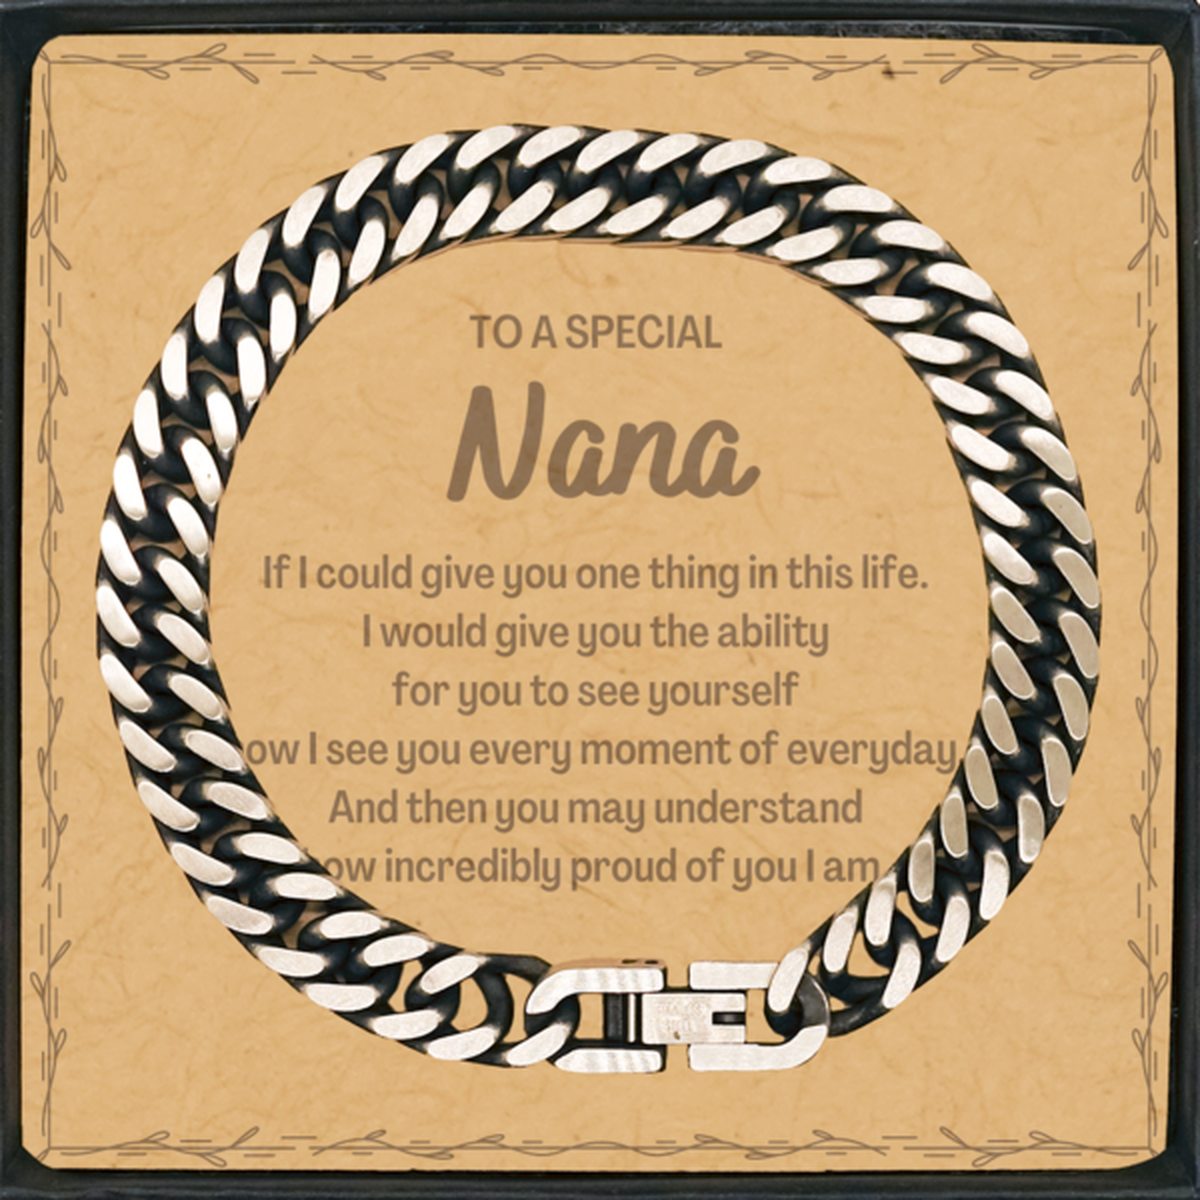 To My Nana Cuban Link Chain Bracelet, Gifts For Nana Message Card, Inspirational Gifts for Christmas Birthday, Epic Gifts for Nana To A Special Nana how incredibly proud of you I am